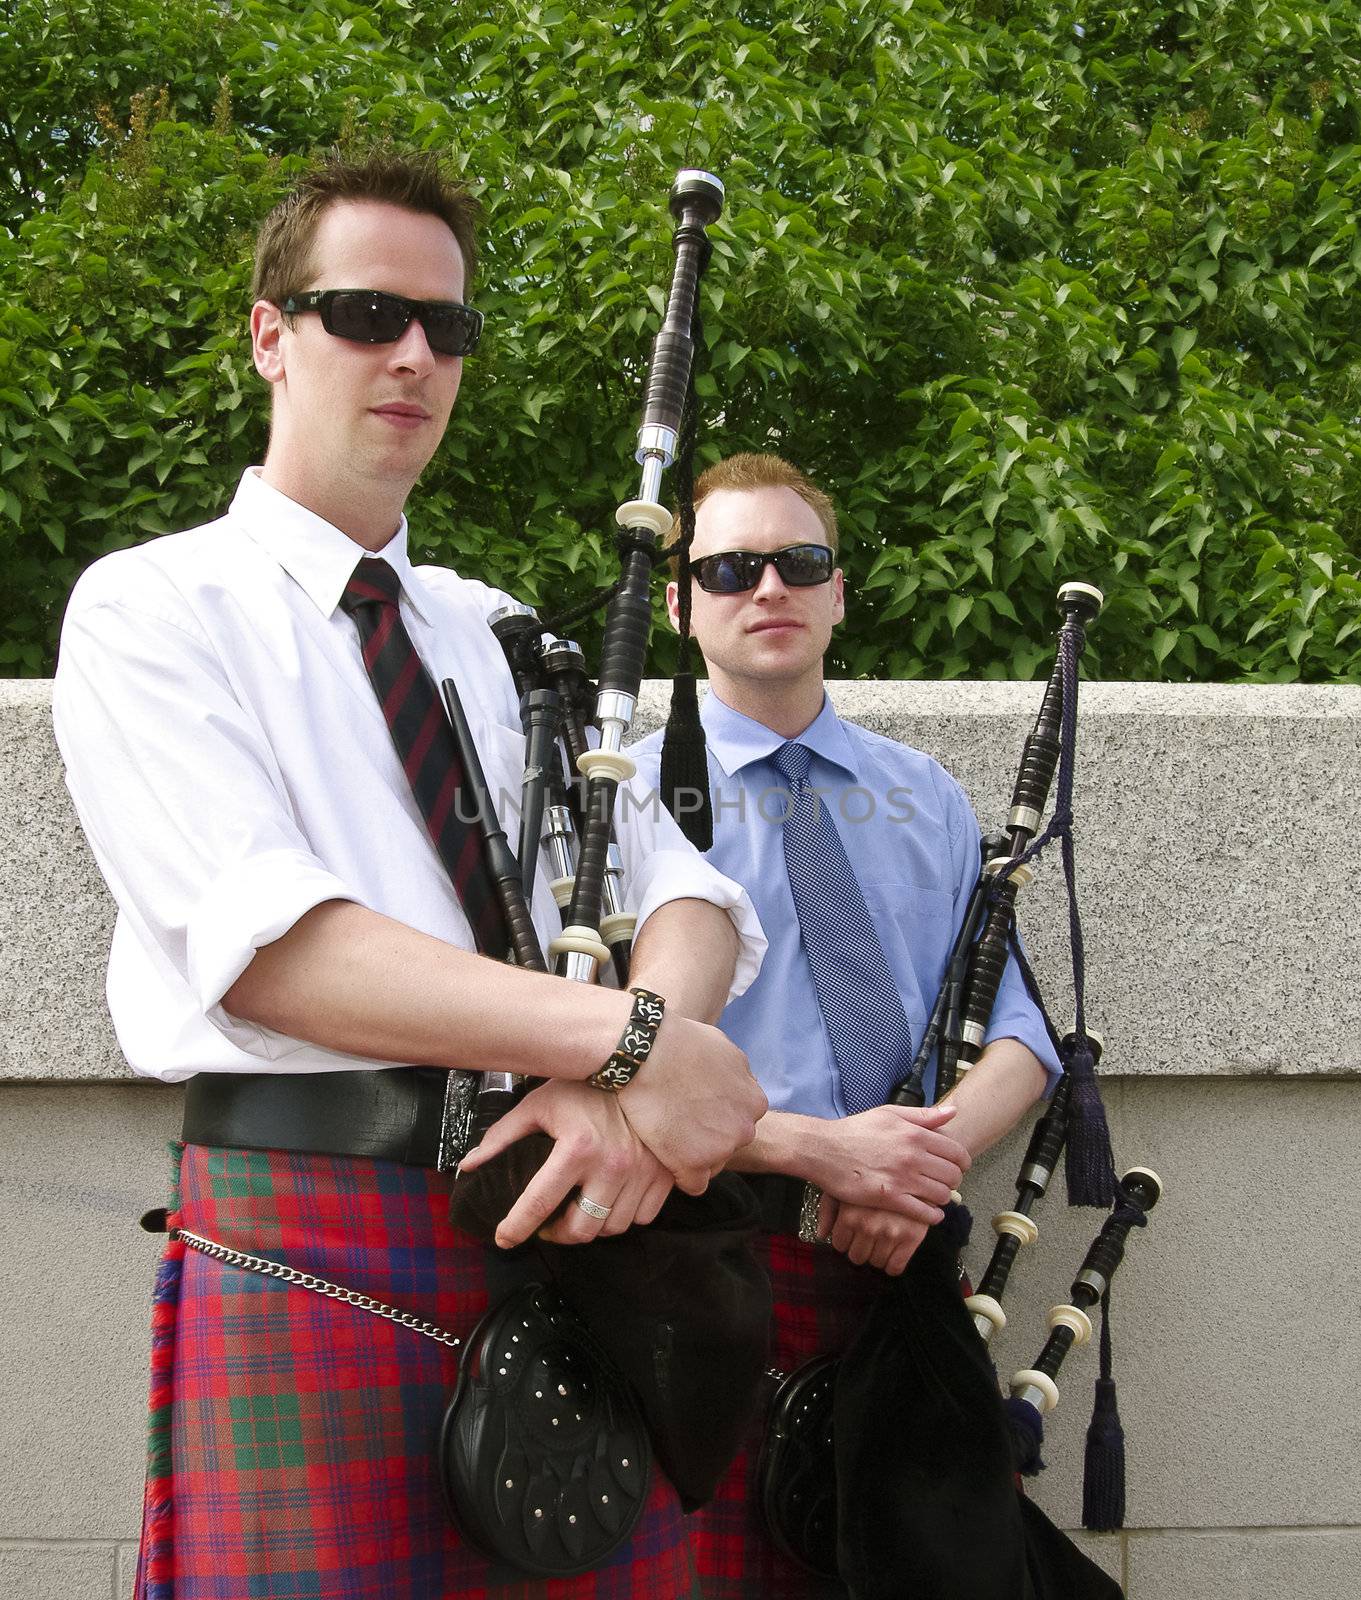 Bagpipe duo relaxing between songs as they entertain tourists in Ottawa, Canada.